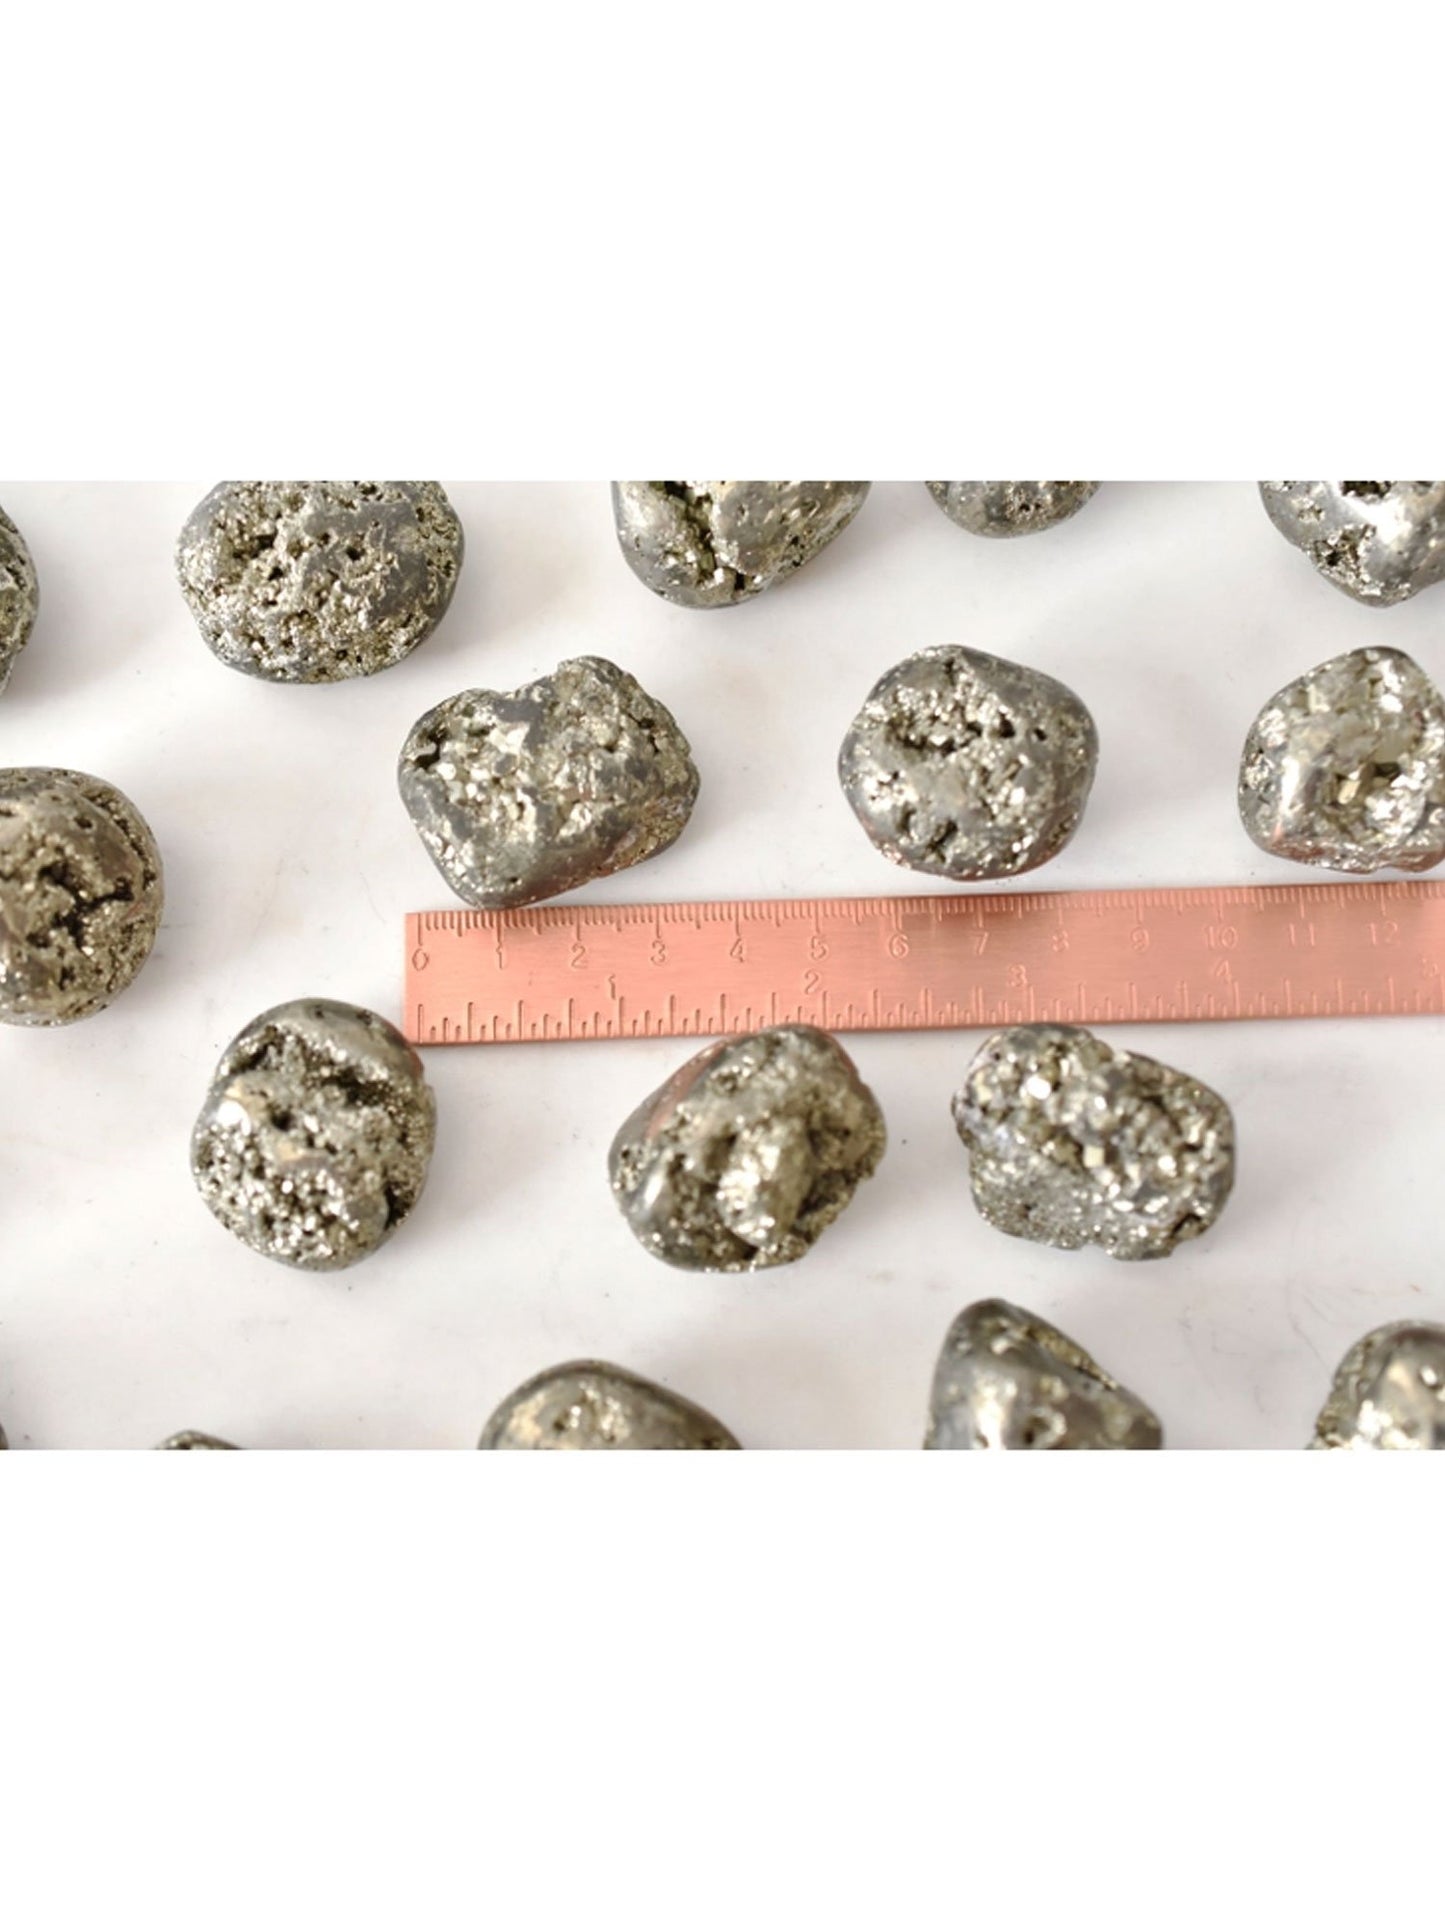 Open Heart Apothecary Gold Pyrite Crystals Tumbled Stones For Manifestation